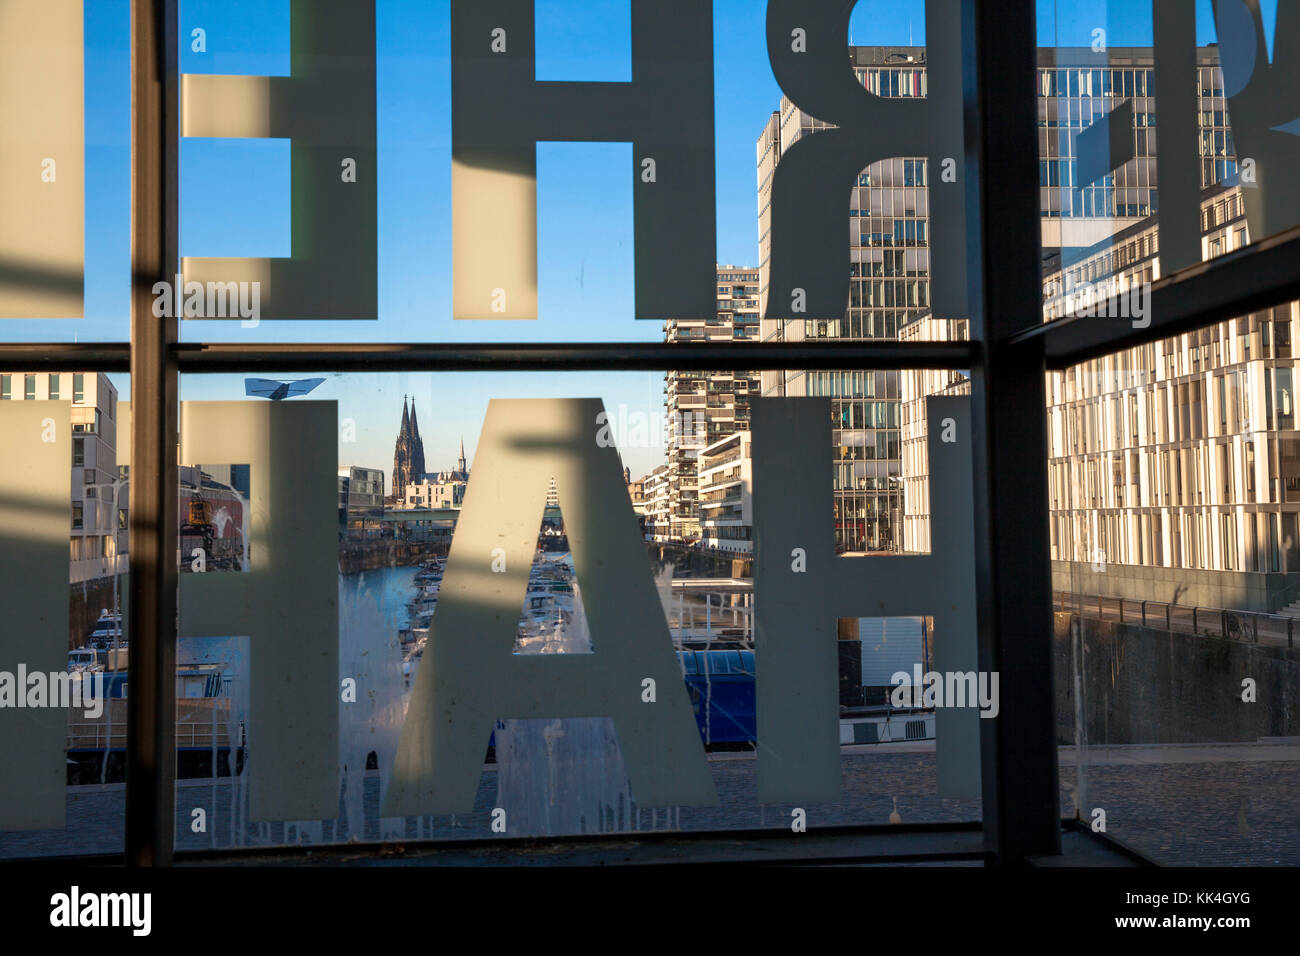 Germany, Cologne, the Rheinau harbour, view through the windows of a staircase with the inscription 'Rheinauhafen', in the background the cathedral.   Stock Photo